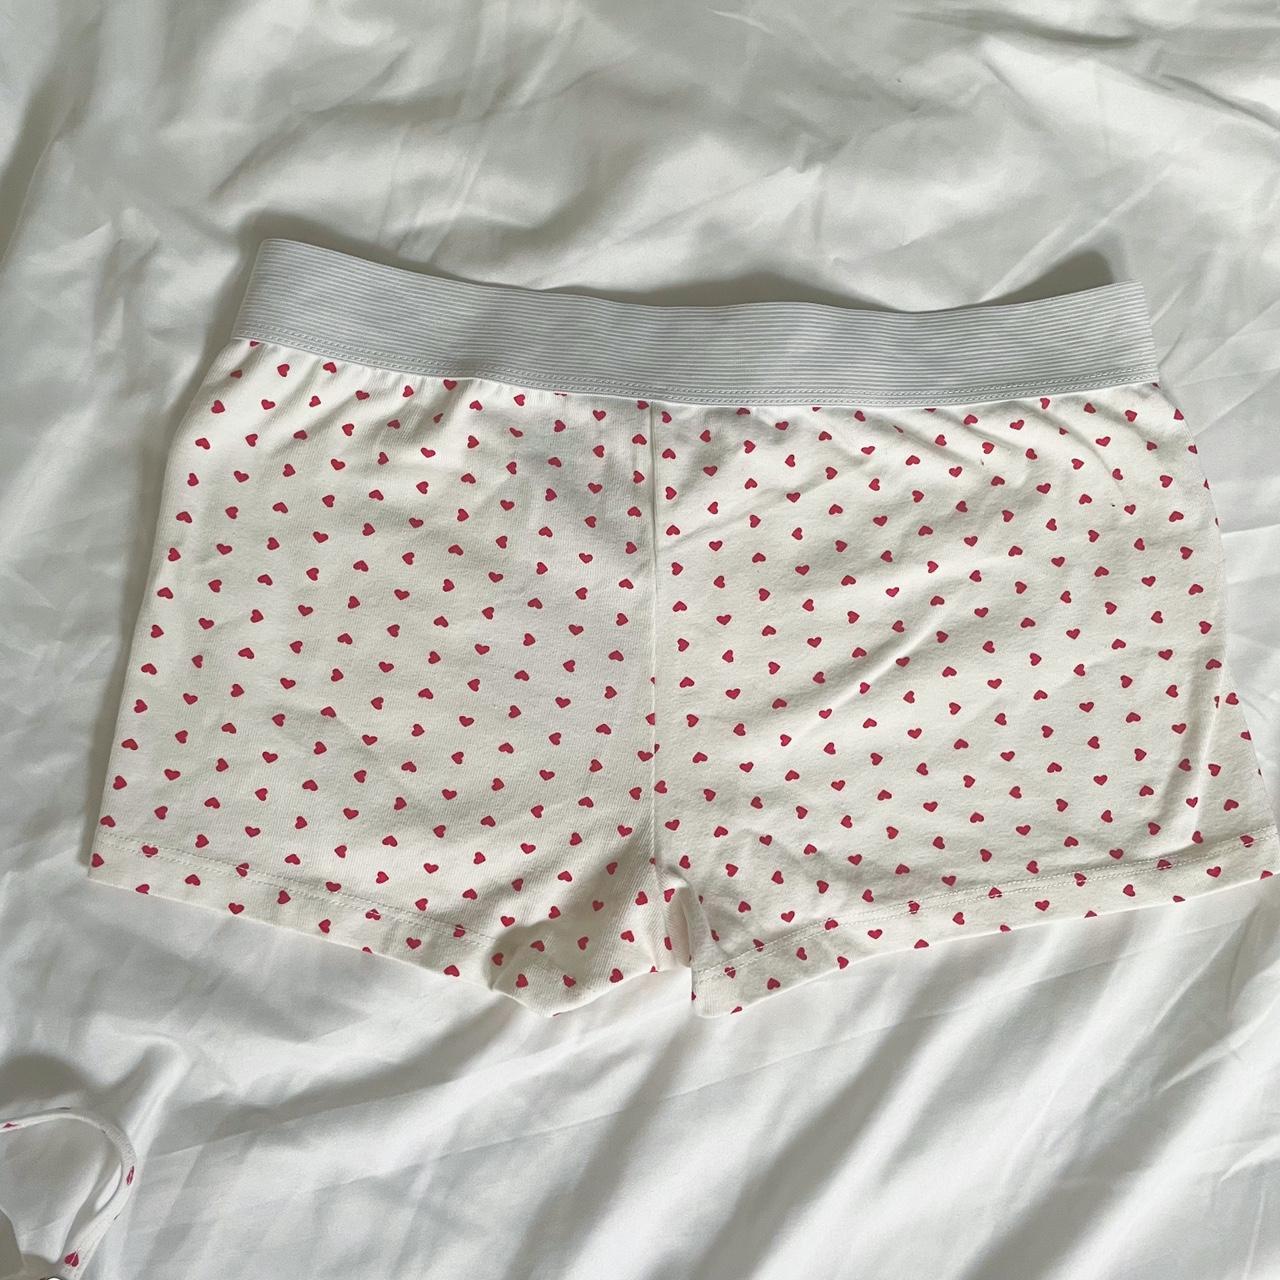 Brandy Melville Heart Boxers White - $25 New With Tags - From Denise